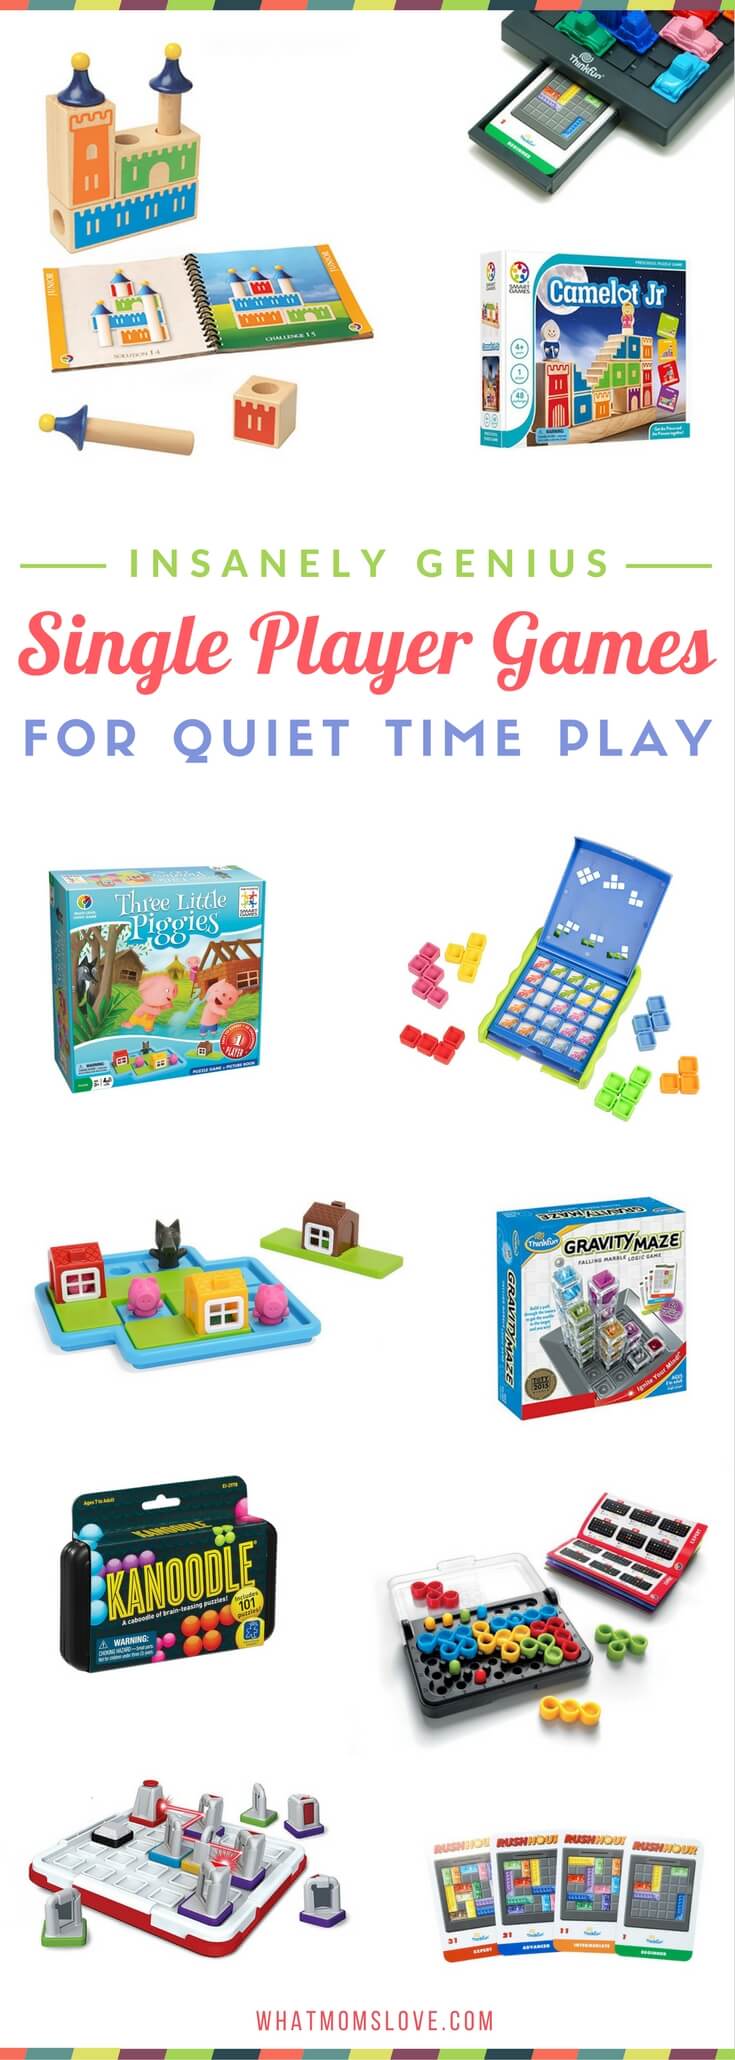 top board games for 3 year olds